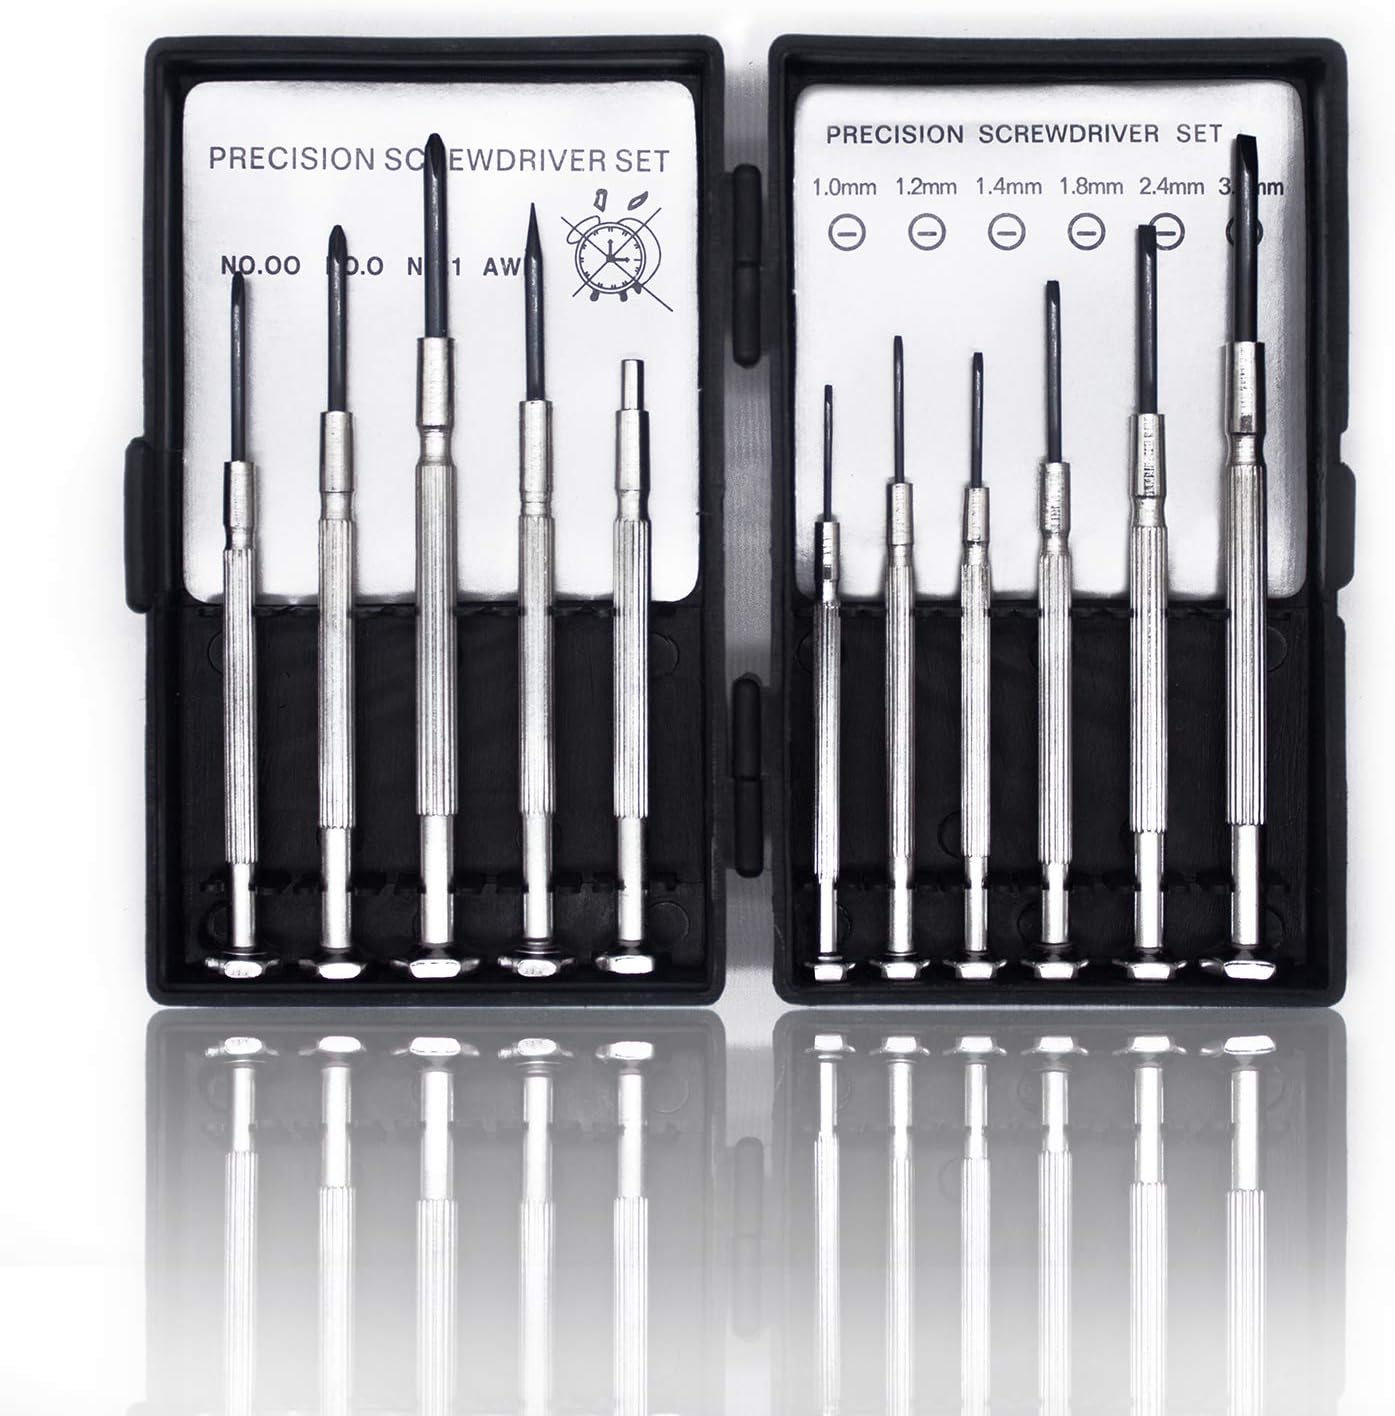 micro screwdriver set detailed review